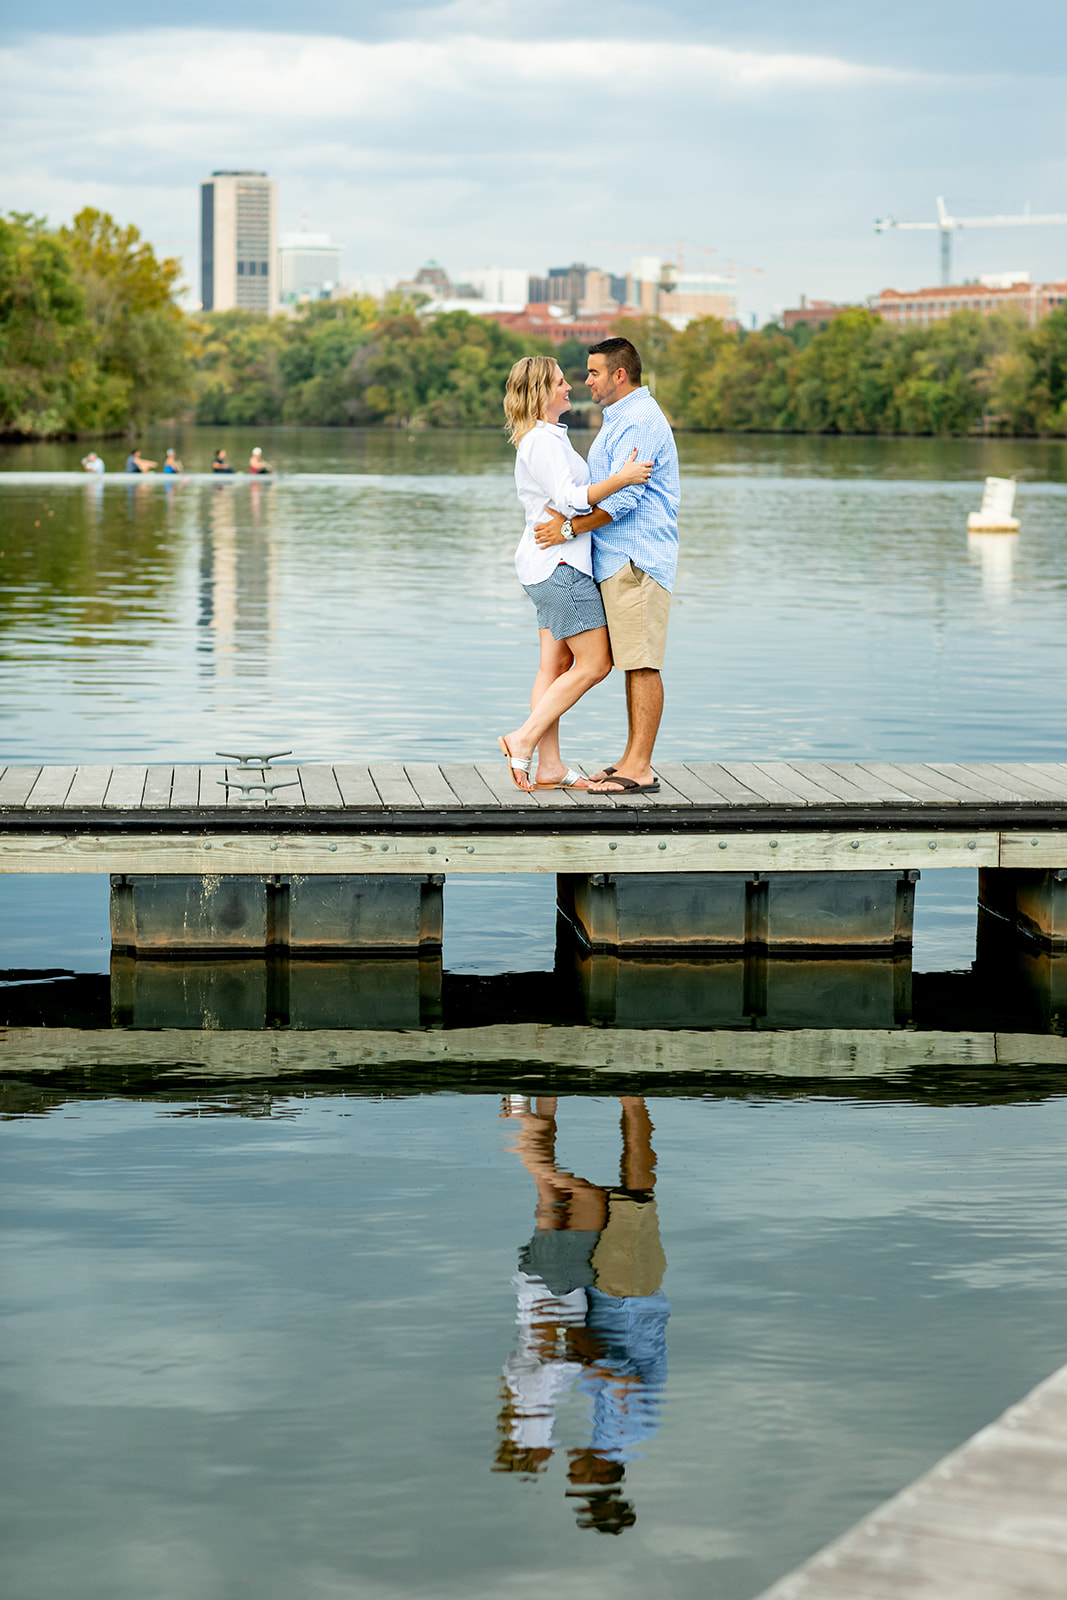 Heather  Kevins Engagement Shoot at The Boathouse at Rocketts Landing - Image Property of www.j-dphoto.com